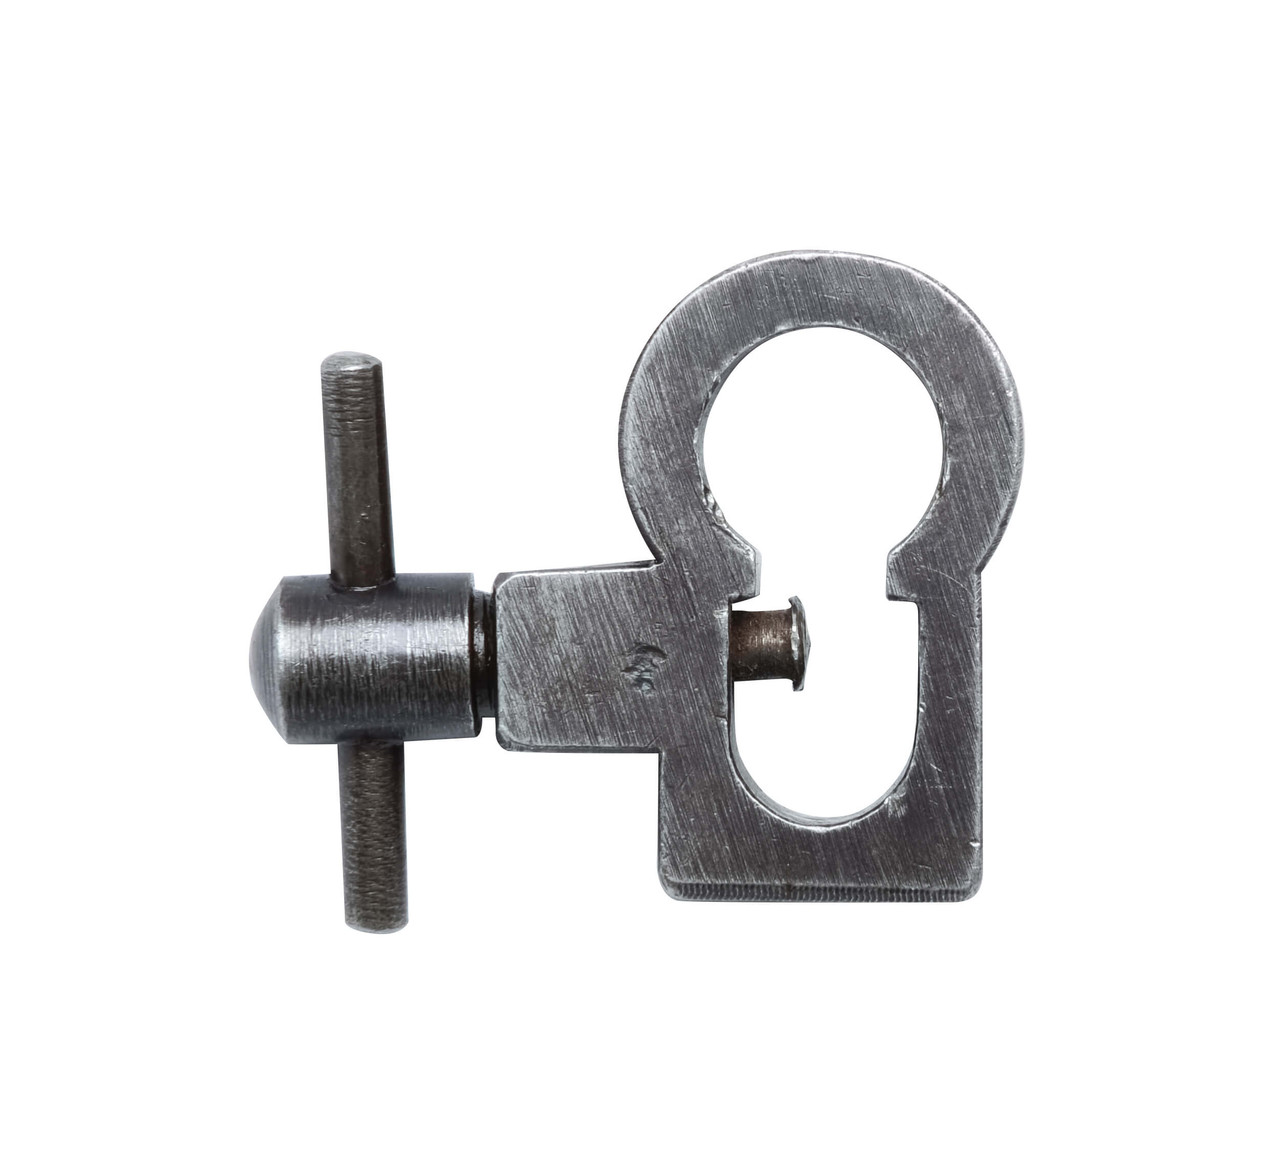 Swiss Luger Front Sight Tool